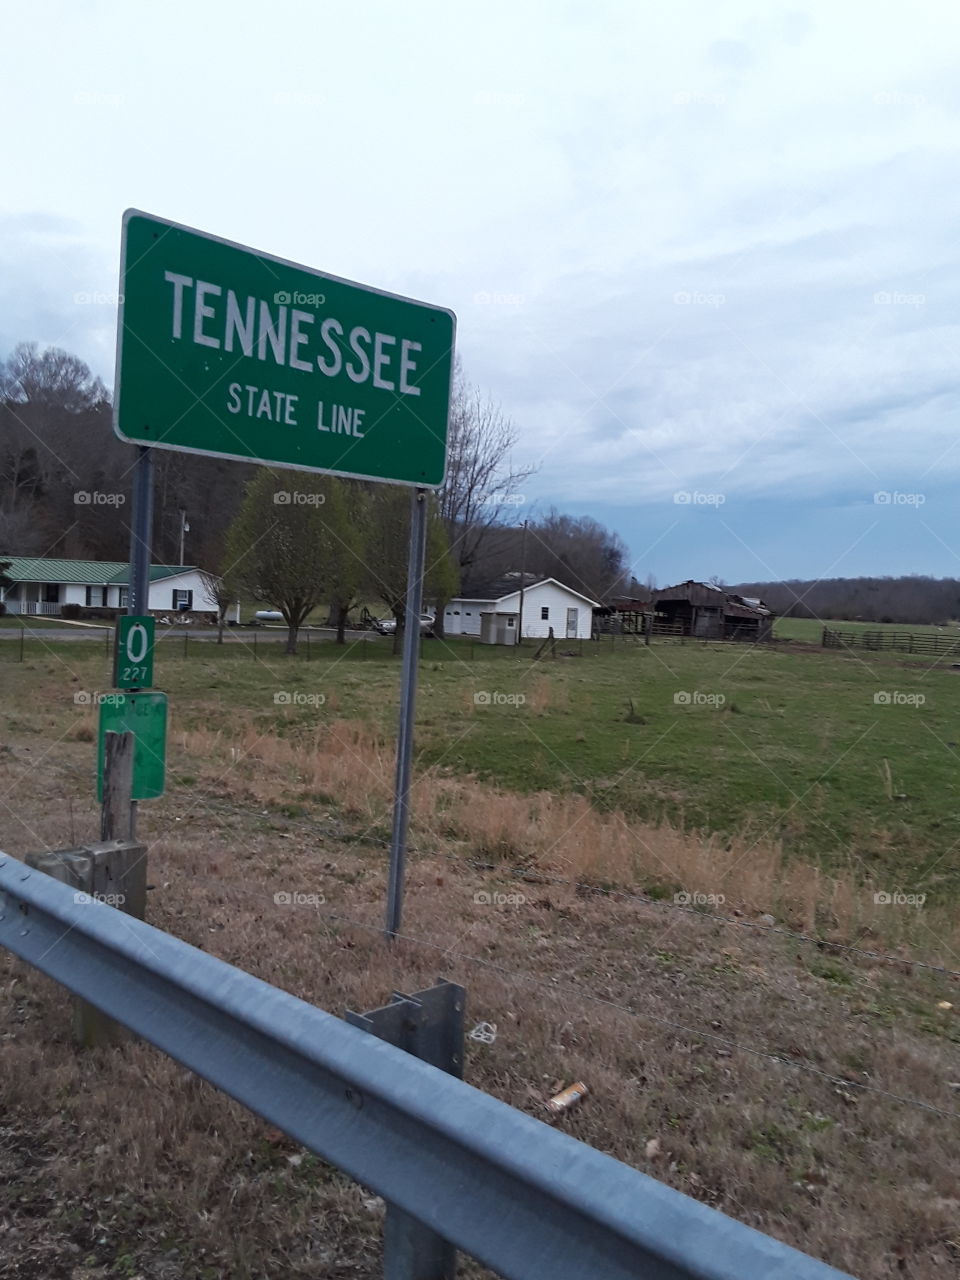 The Tennessee State Line in rural North Alabama with farm house and fields.